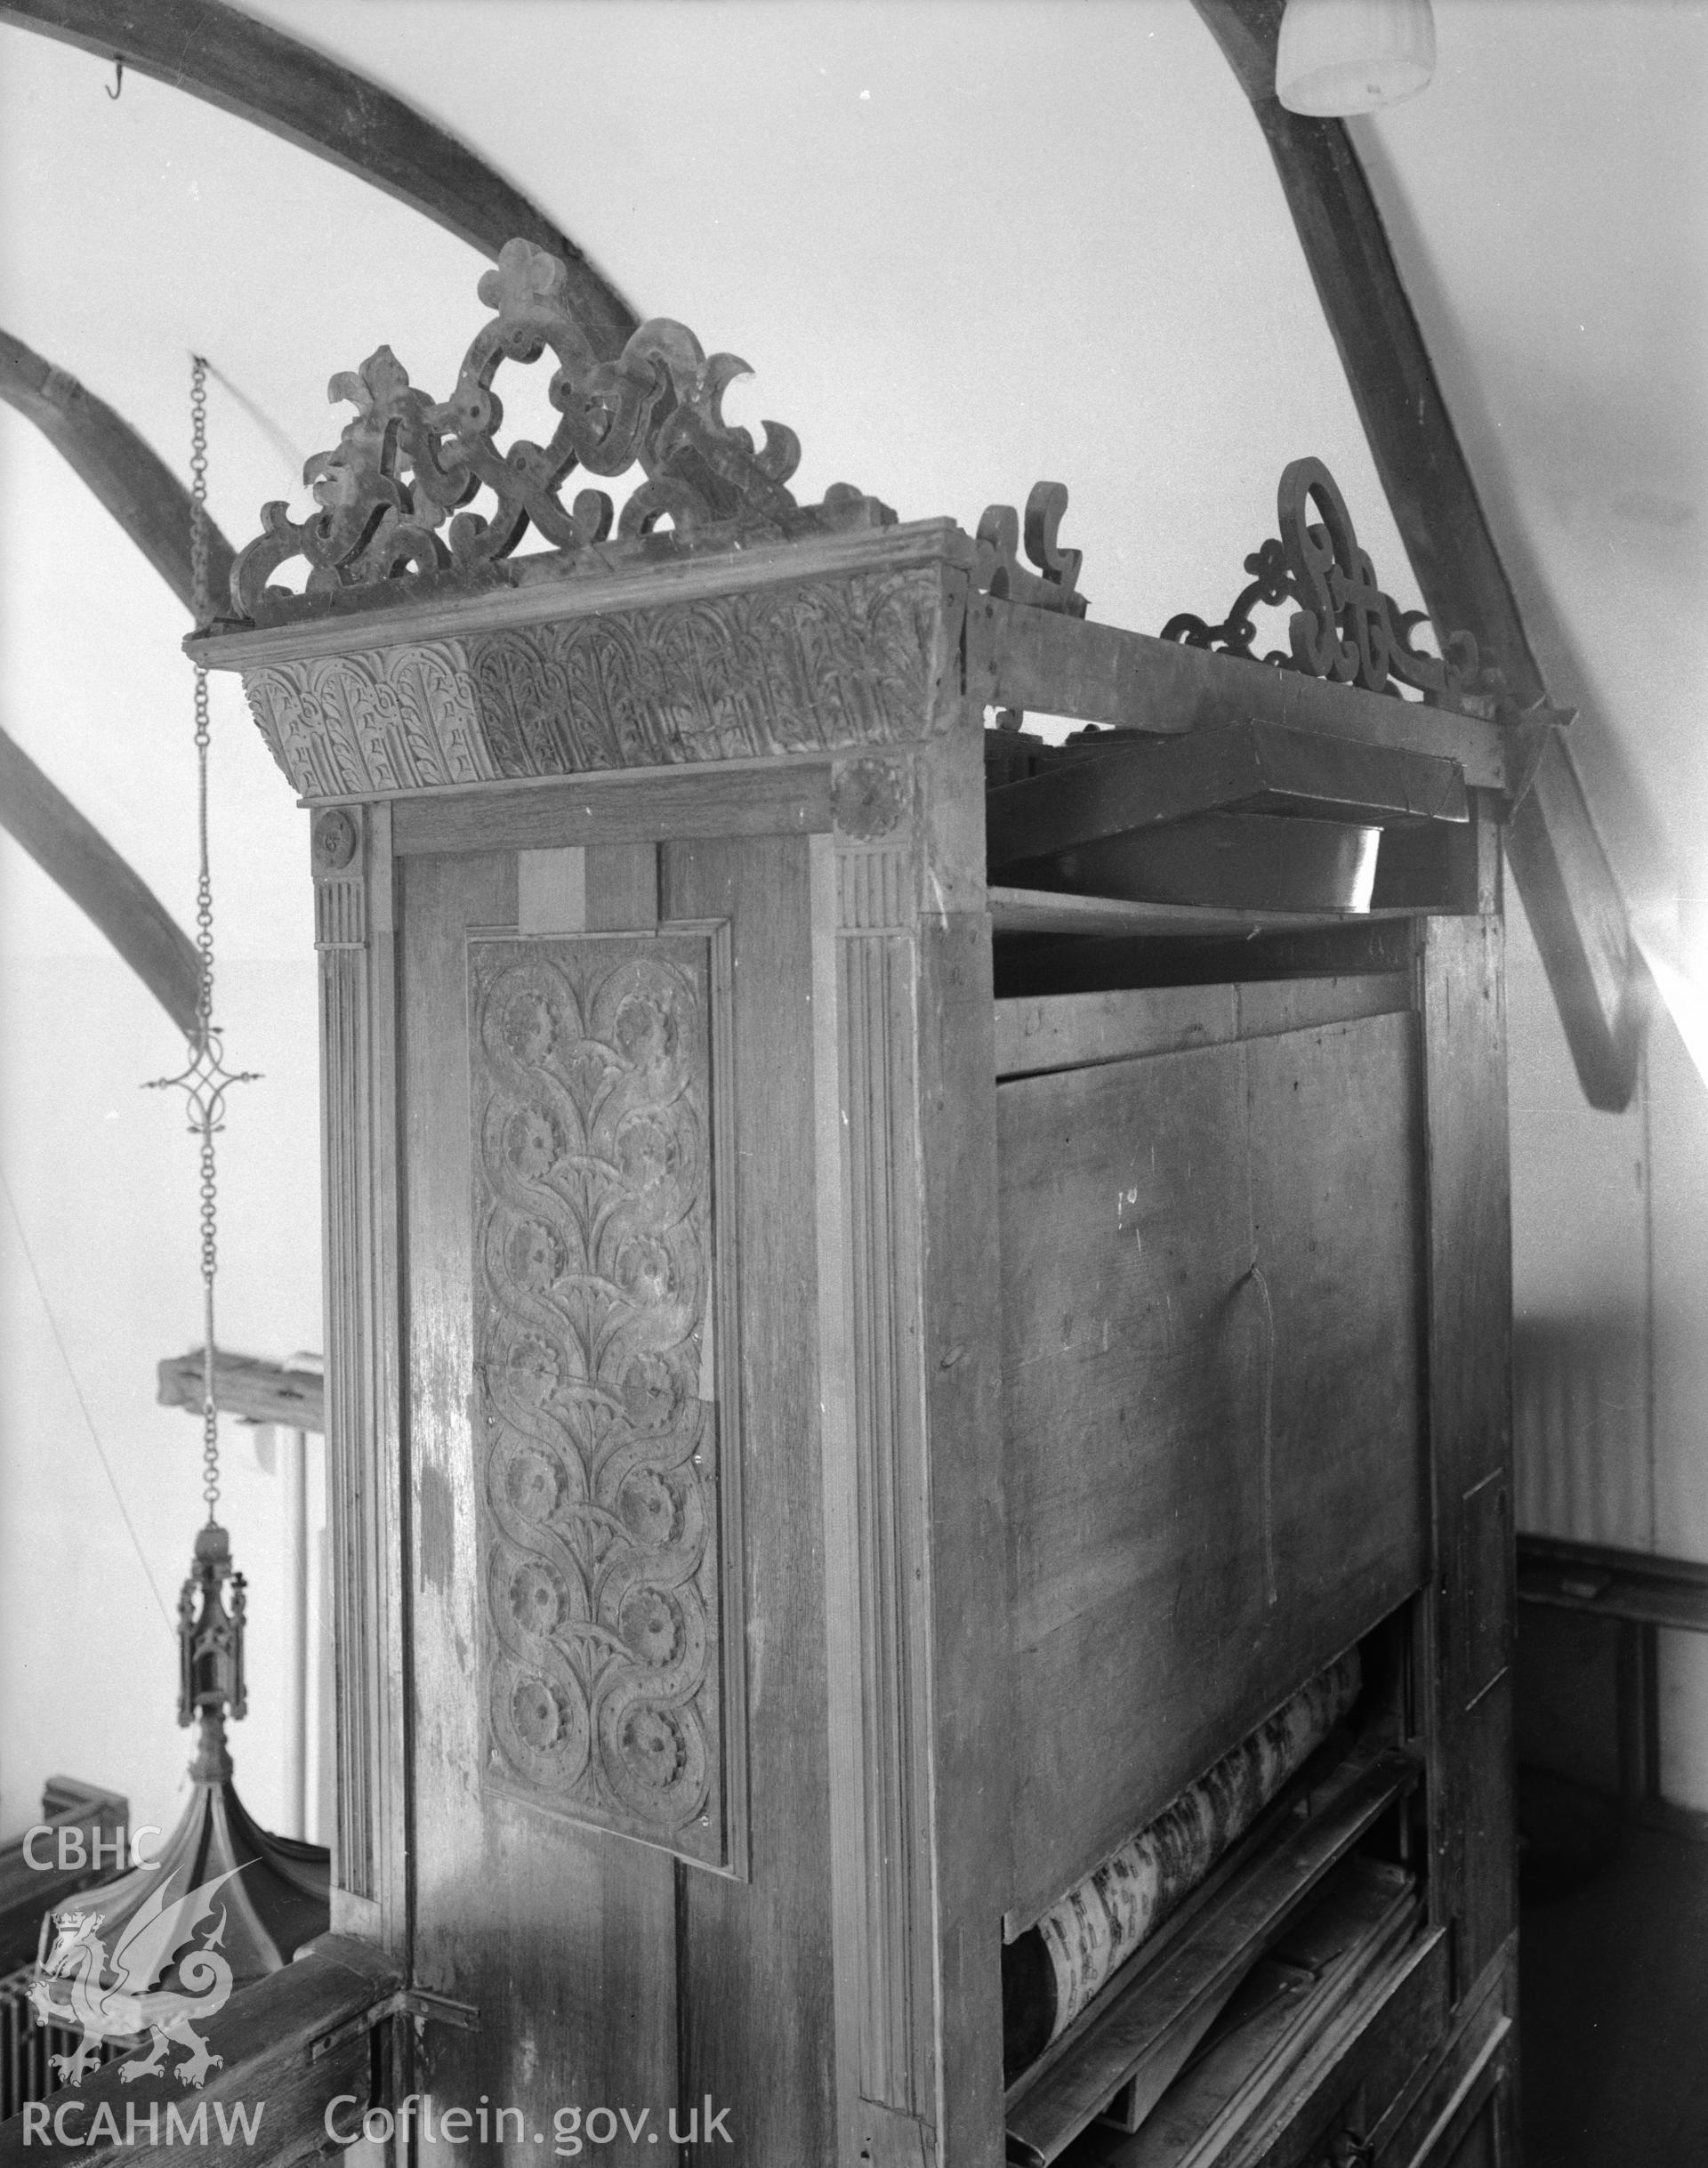 Interior view showing the side panel of the barrel organ.